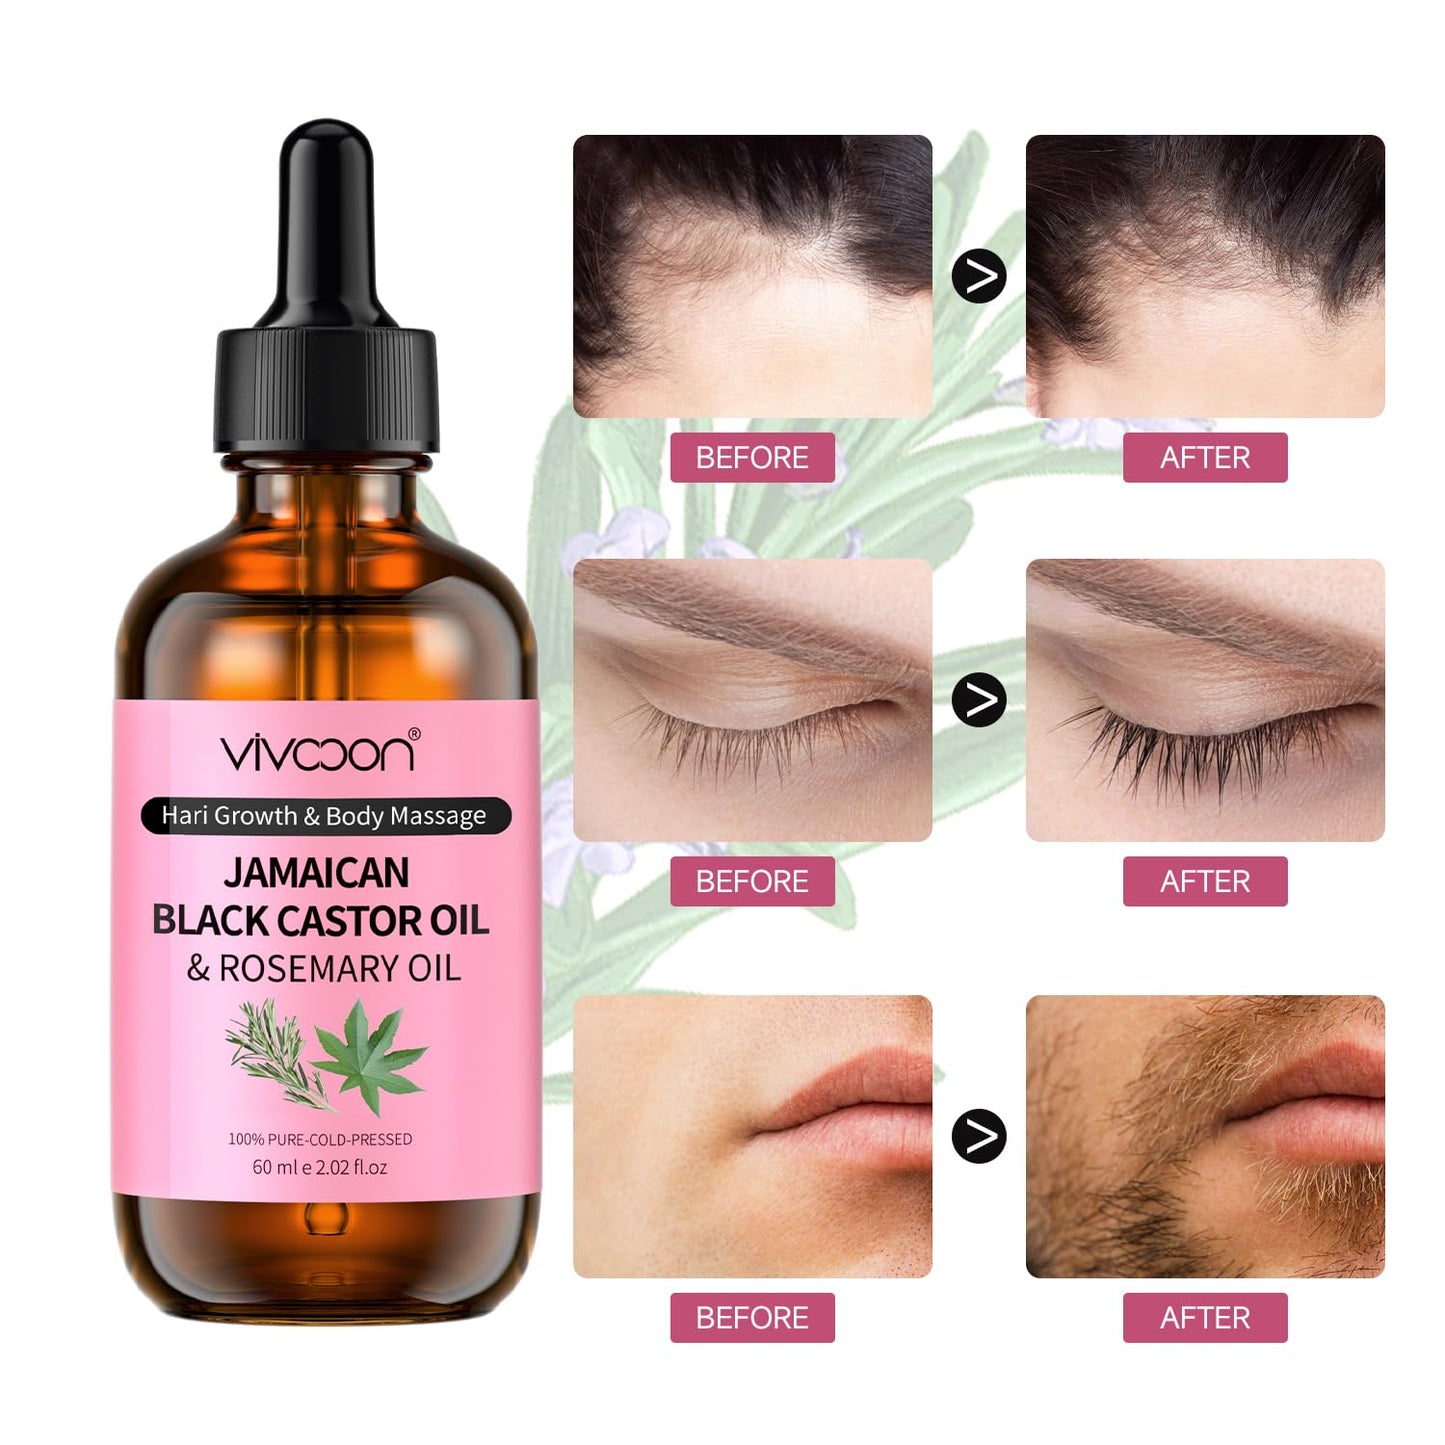 Vivccon Jamaican Black Castor Oil with Rosemary, Black Castor Oil Cold Pressed, Organic Castor Oil for Hair Growth, Eyelashes and Eyebrows Growth, Castor Oil 100% Natural & Pure